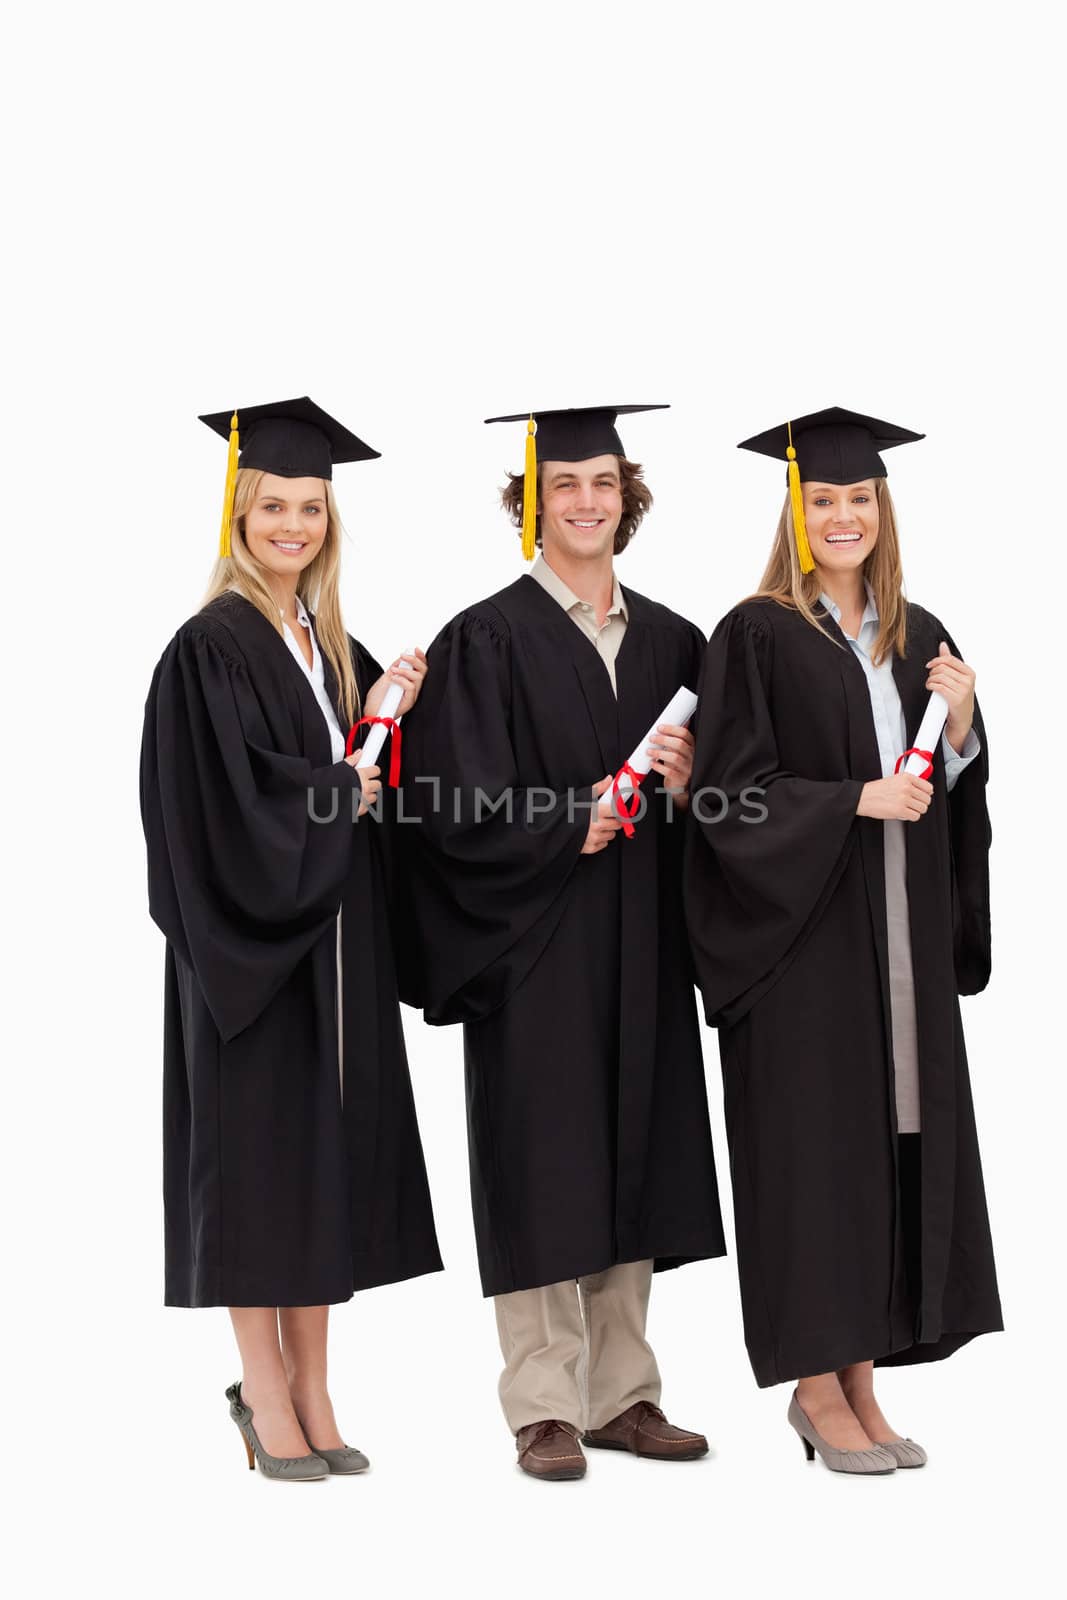 Three smiling students in graduate robe holding a diploma by Wavebreakmedia